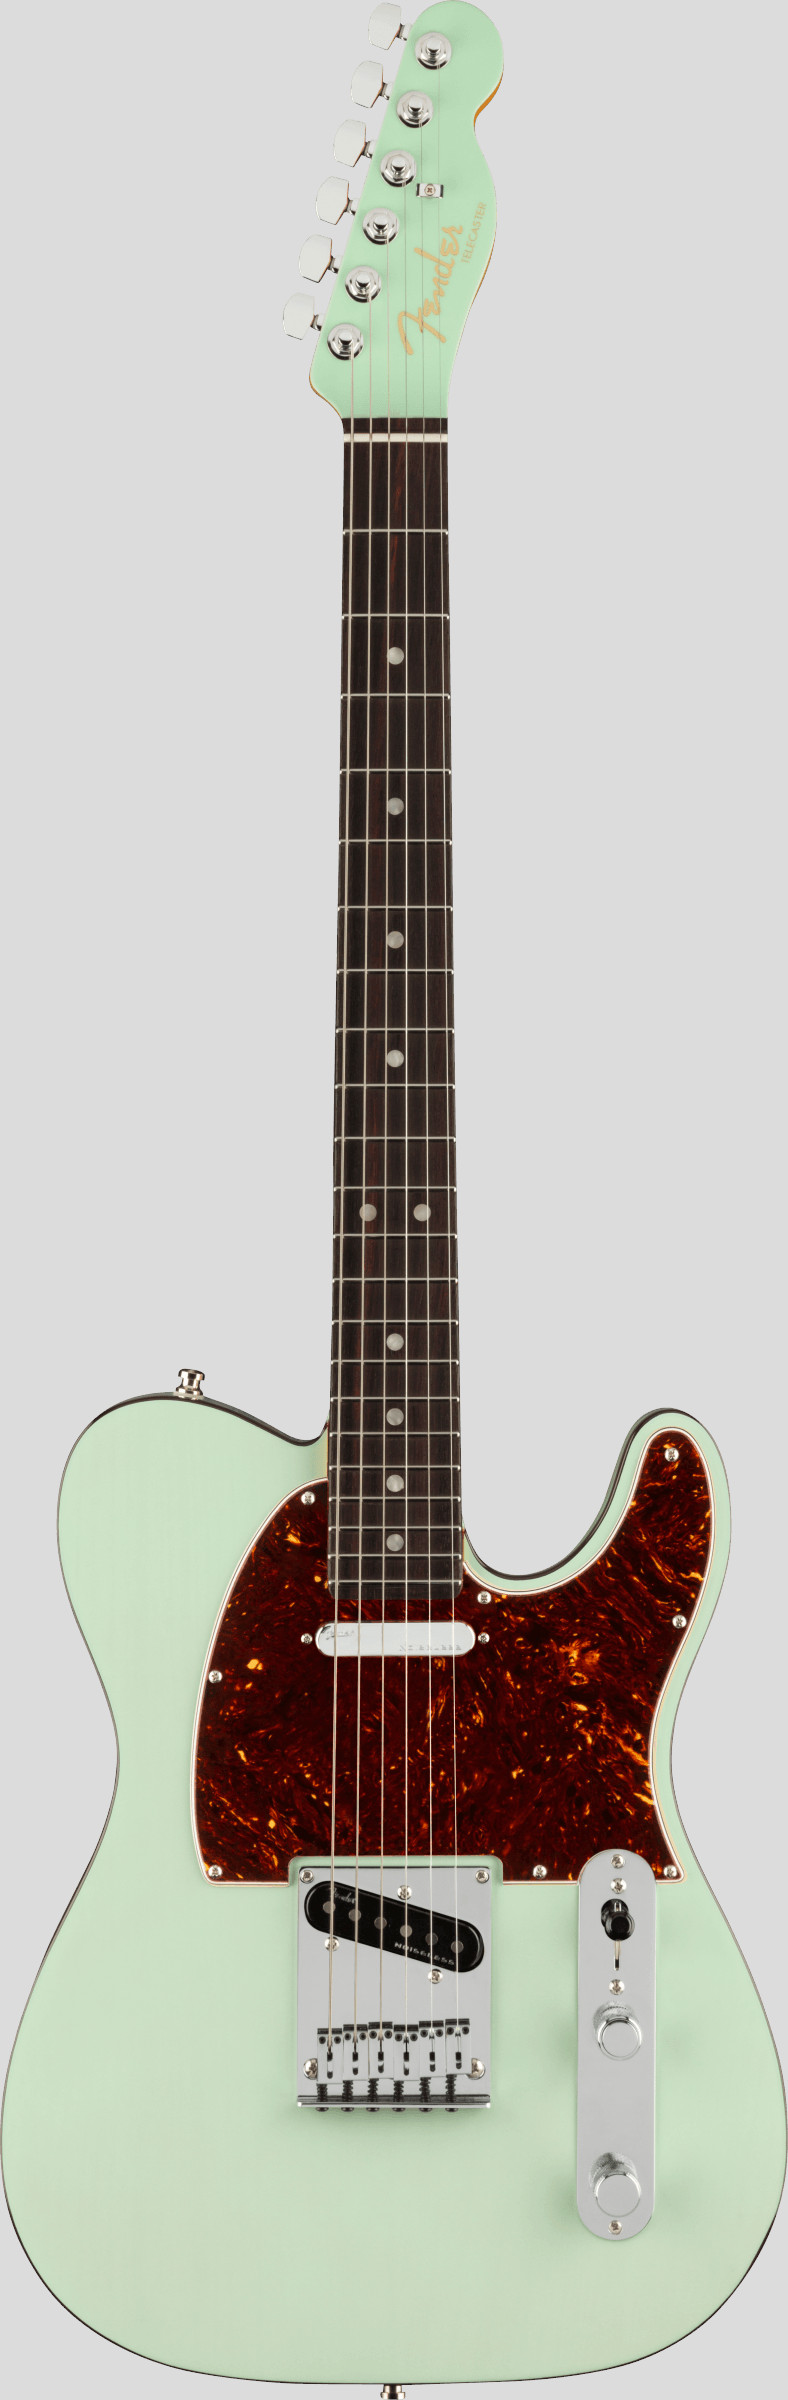 Fender American Ultra Luxe Telecaster Transparent Surf Green 1